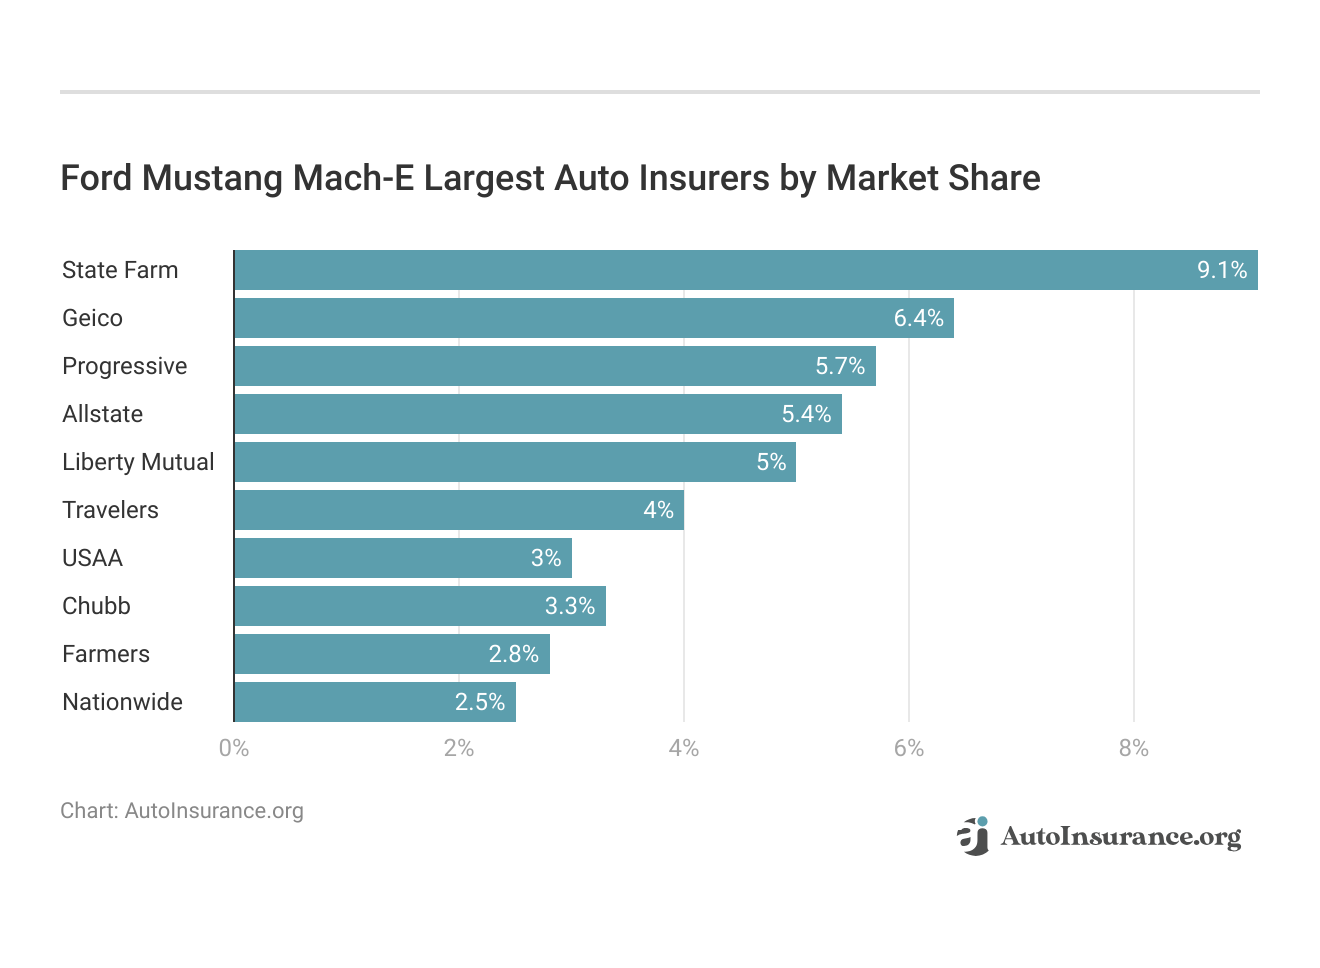 <h3>Ford Mustang Mach-E Largest Auto Insurers by Market Share</h3>